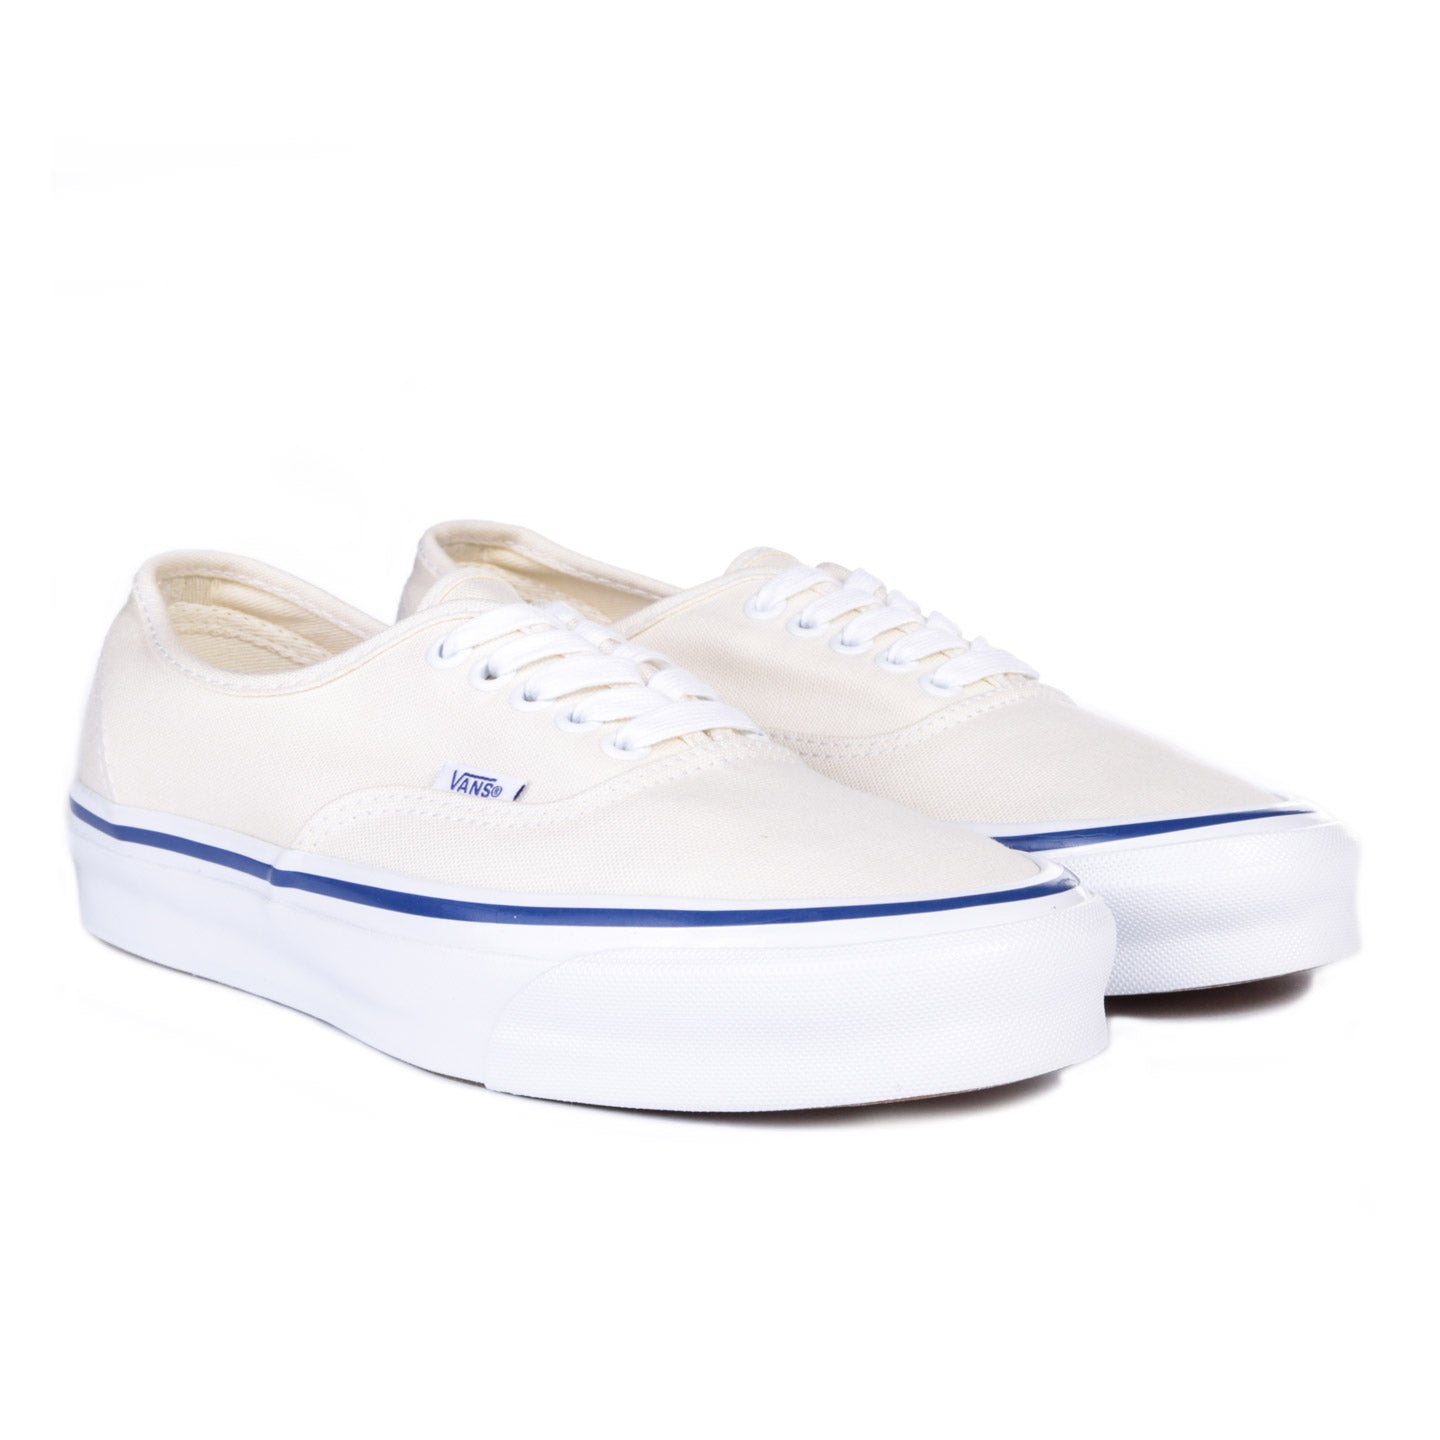 VAULT BY VANS OG AUTHENTIC LX CLASSIC WHITE | TODAY CLOTHING